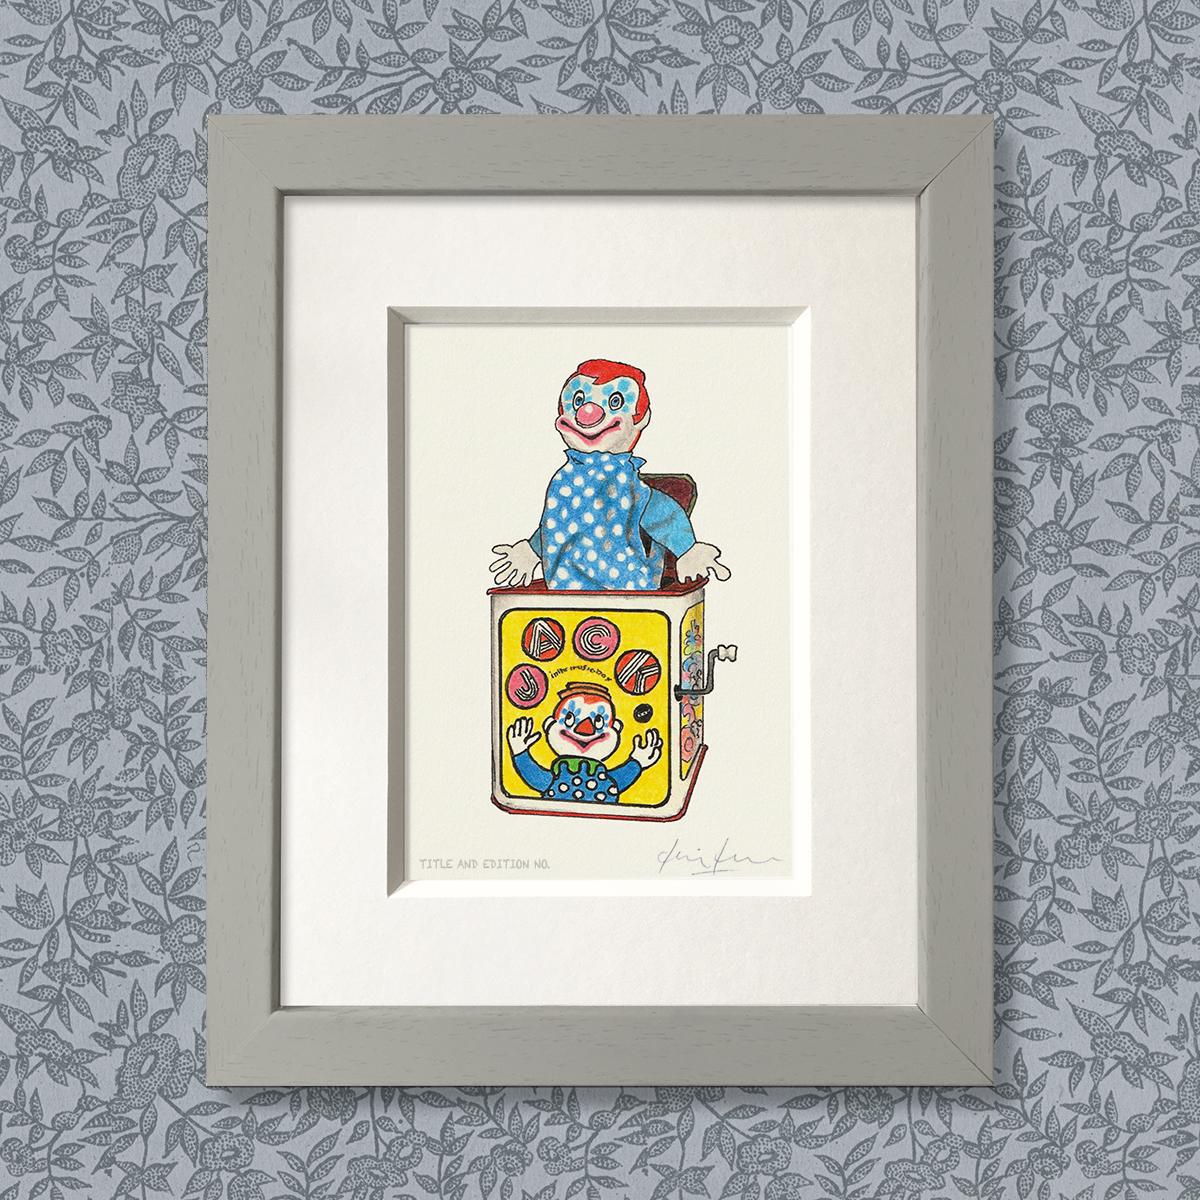 Limited edition print from a pen, ink and coloured pencil drawing of a Jack in the Box in a grey frame